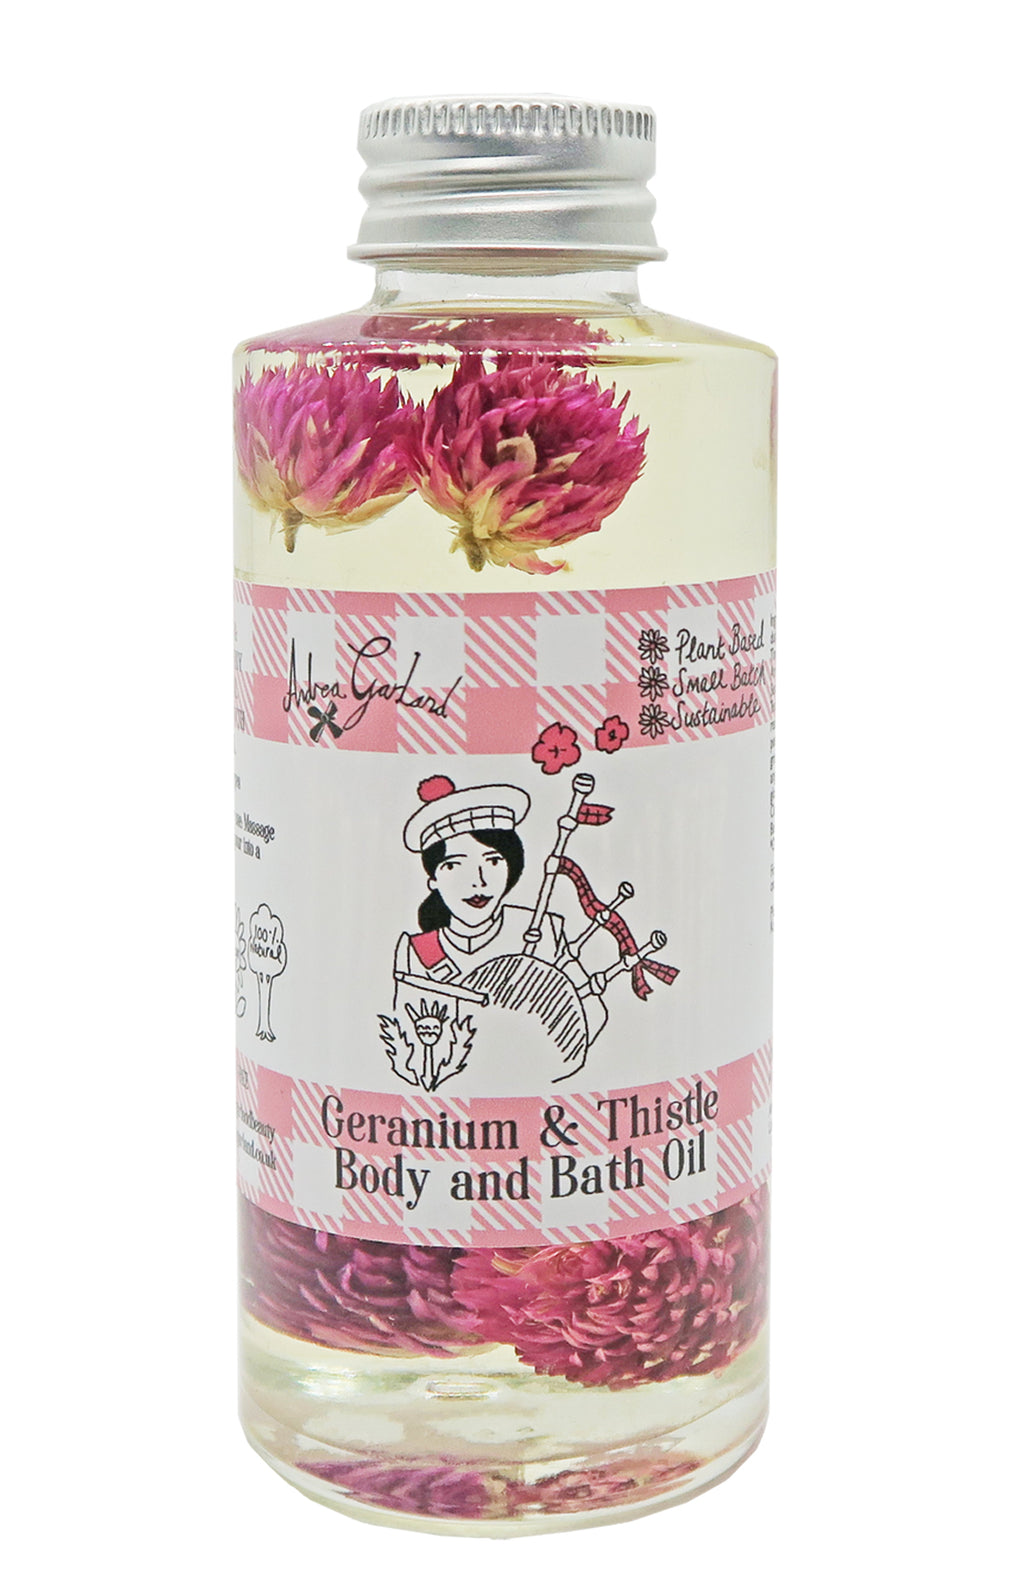 Geranium and Thistle Body and Bath oil - Andrea Garland